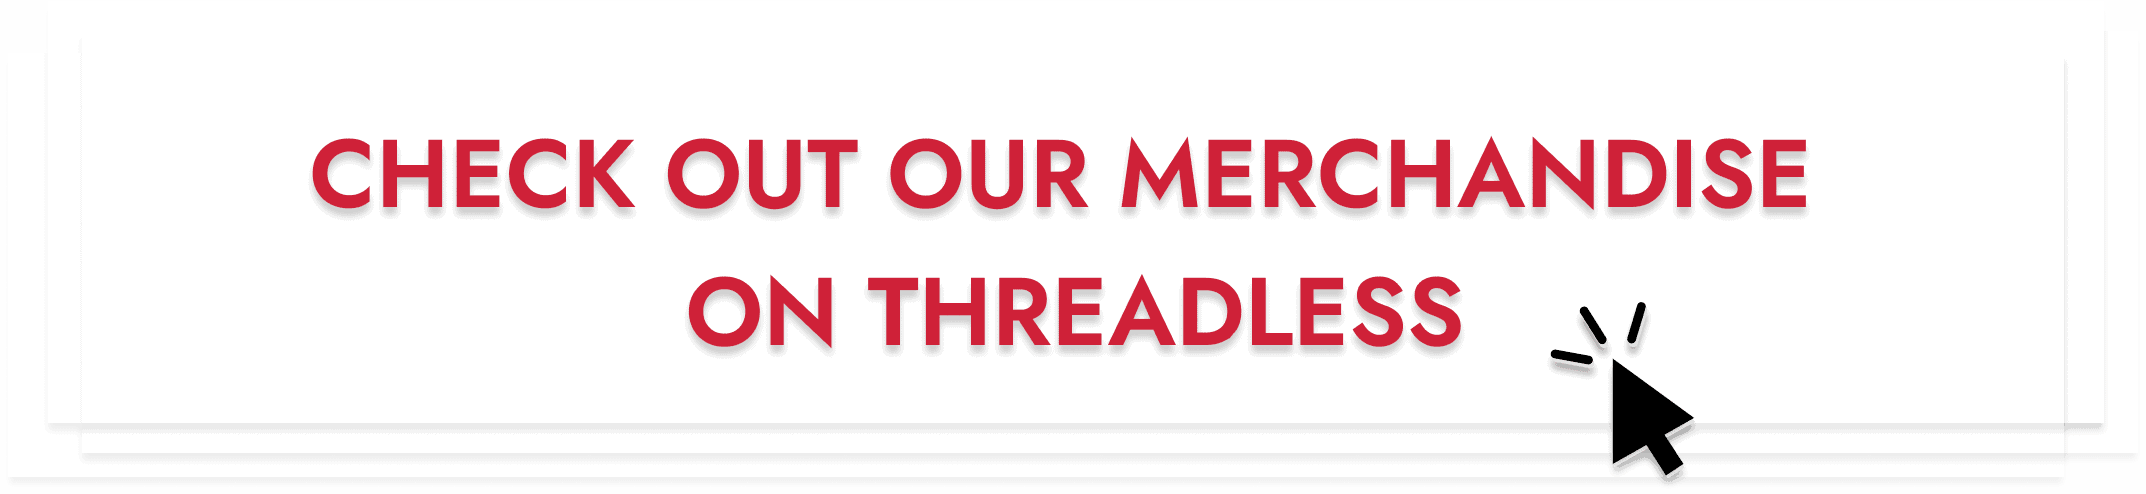 "Check Out Our Merchandise on Threadless" banner with cursor